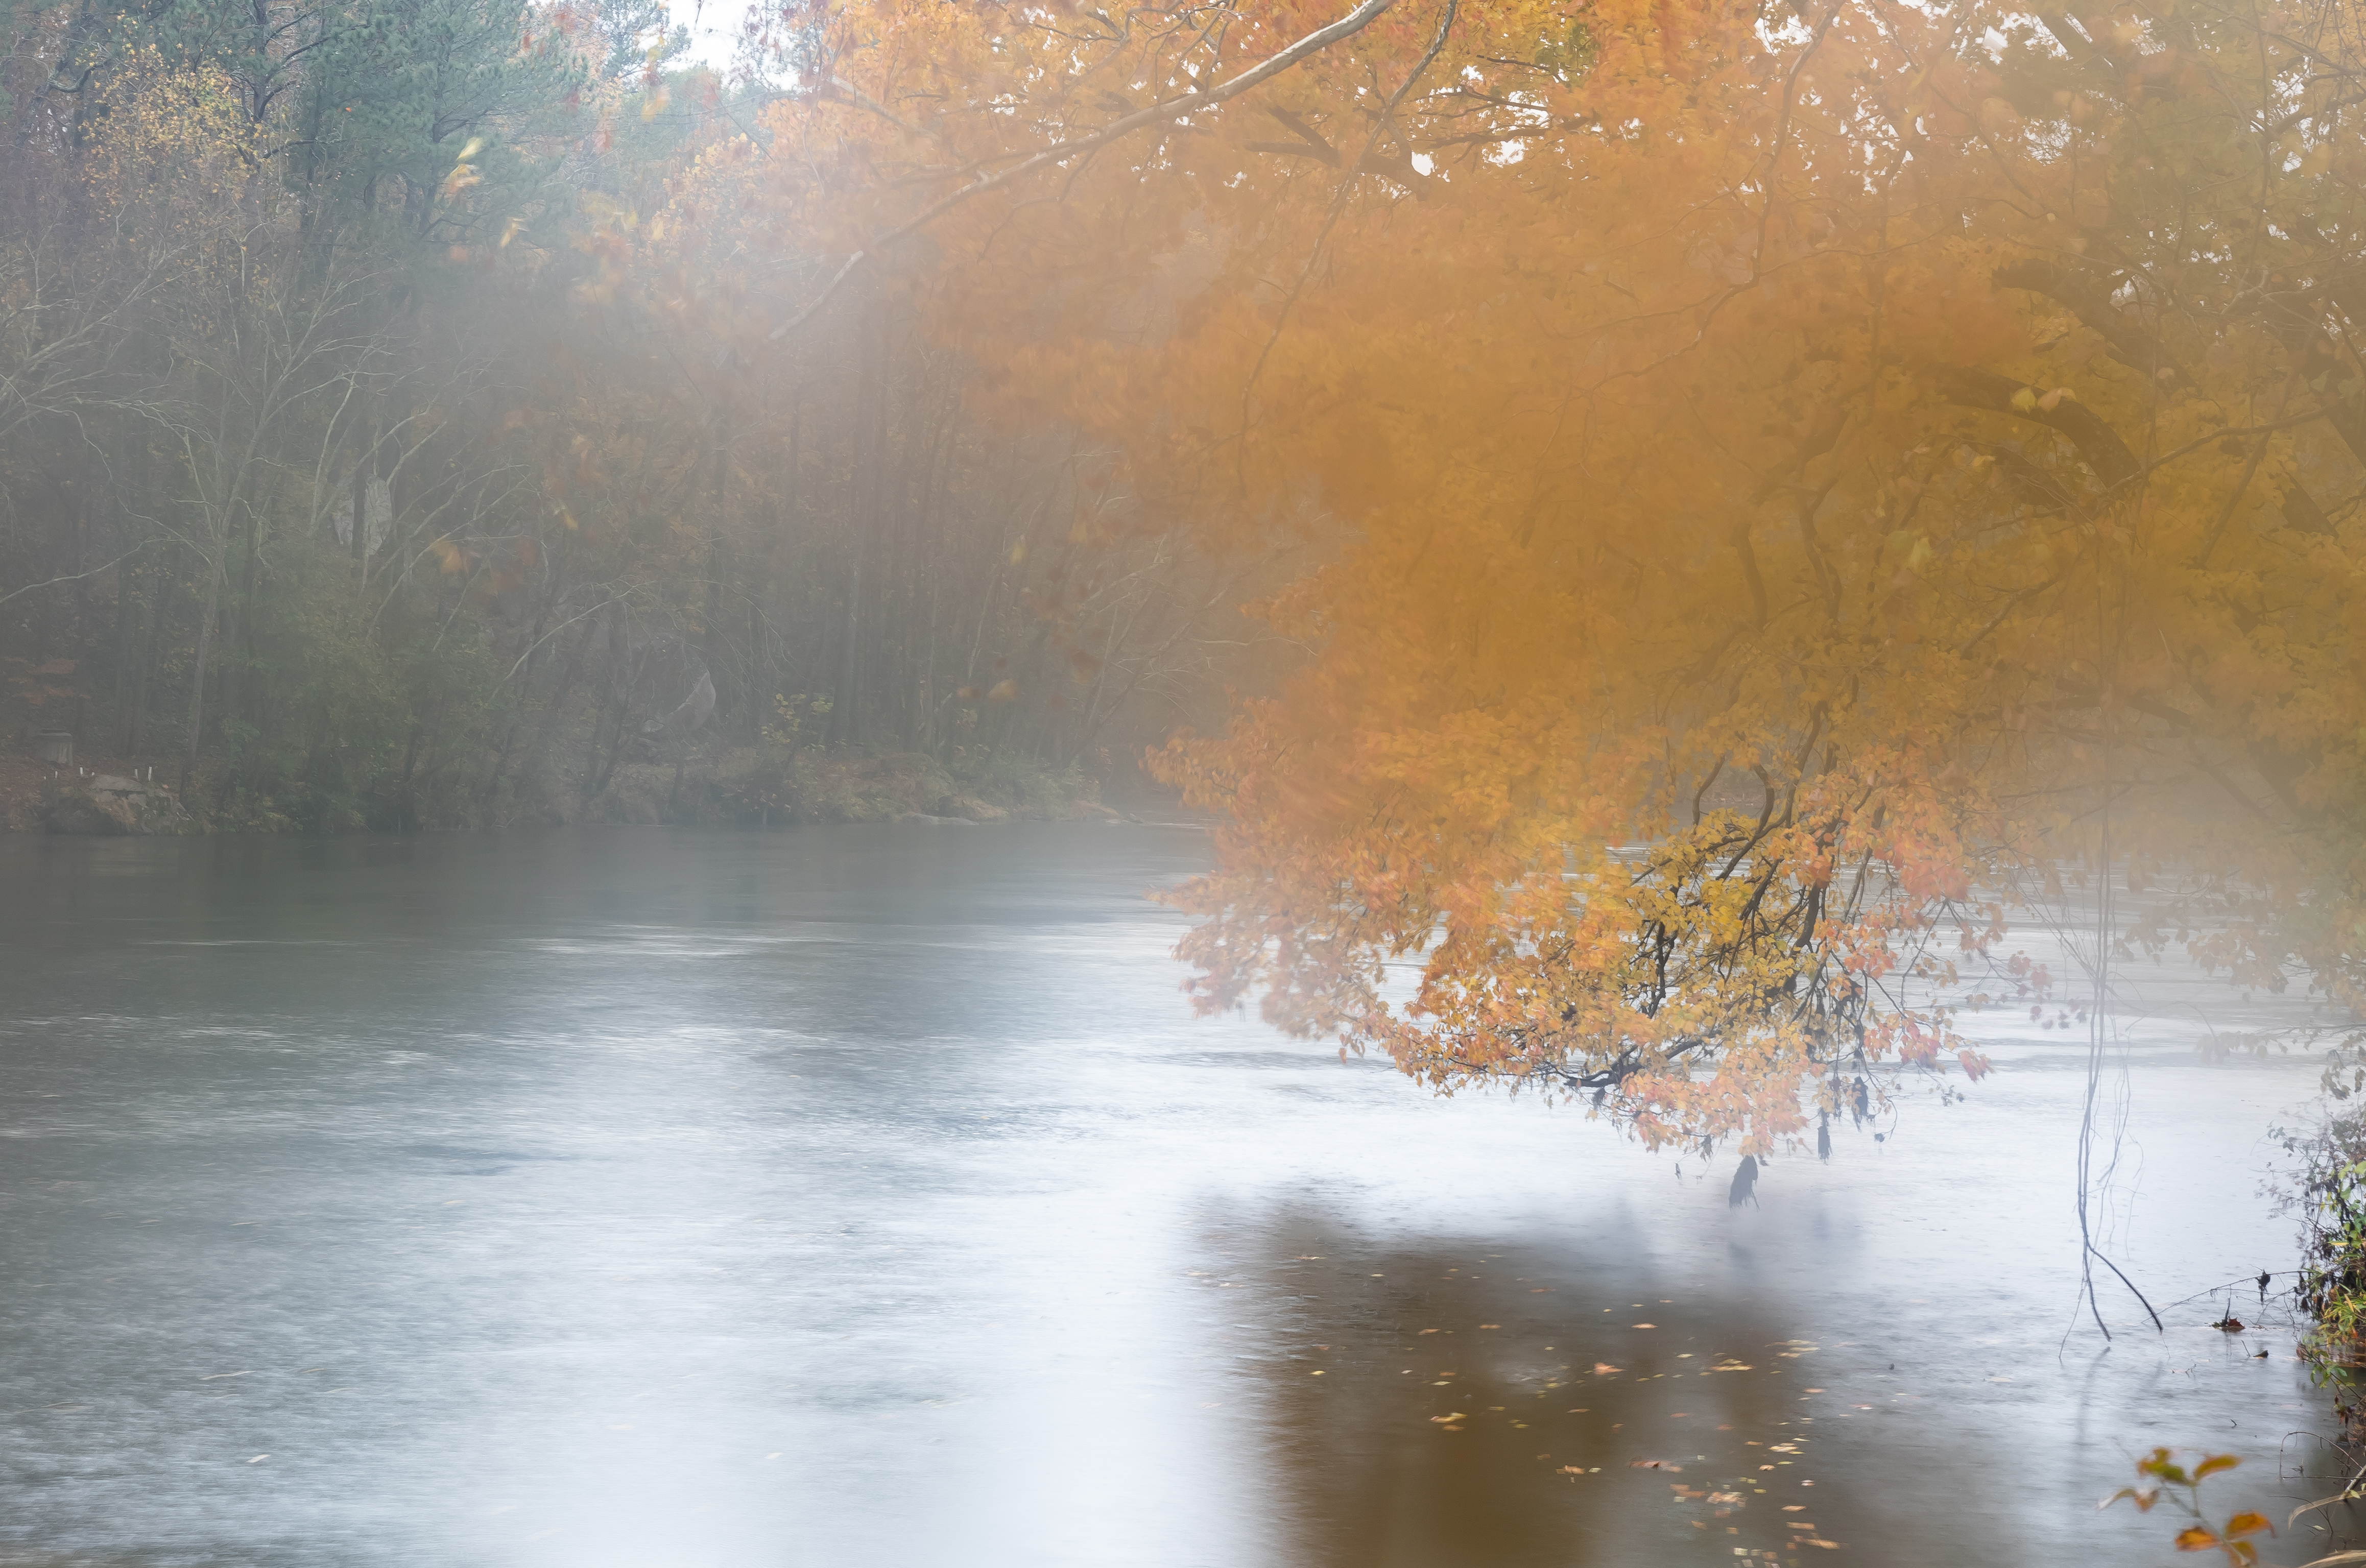 Went to the river, missing the fog and mist by an hour or so. I tucked my camera inside my jacket and found a foggy lens-it was much warmer than I expected. I decided to use it anyway....